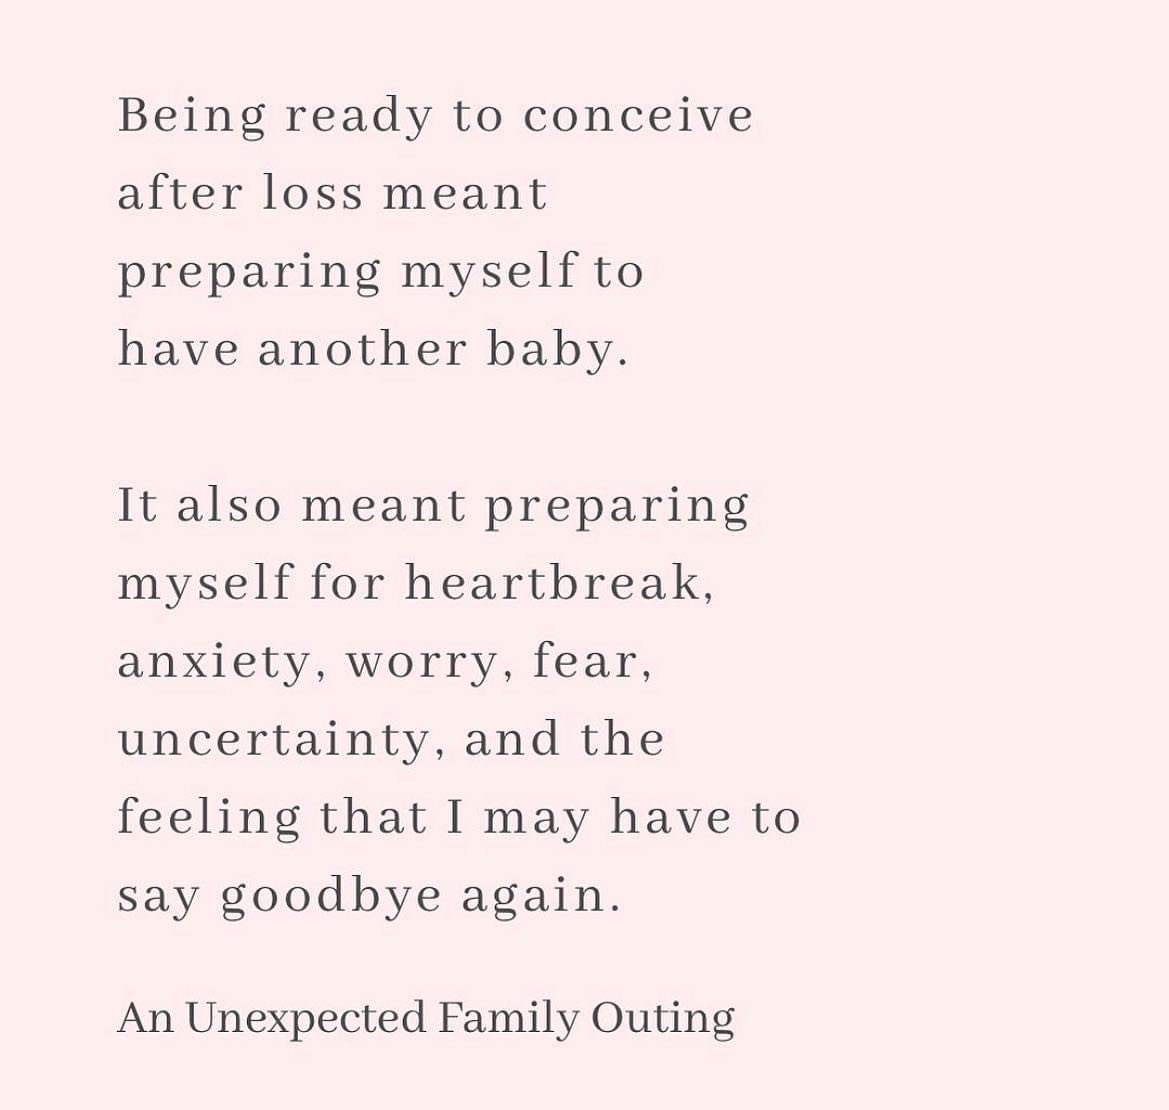 Preparing yourself for any outcome. 

#pregnancyloss #miscarriage #stillbirth #infantloss #PAL